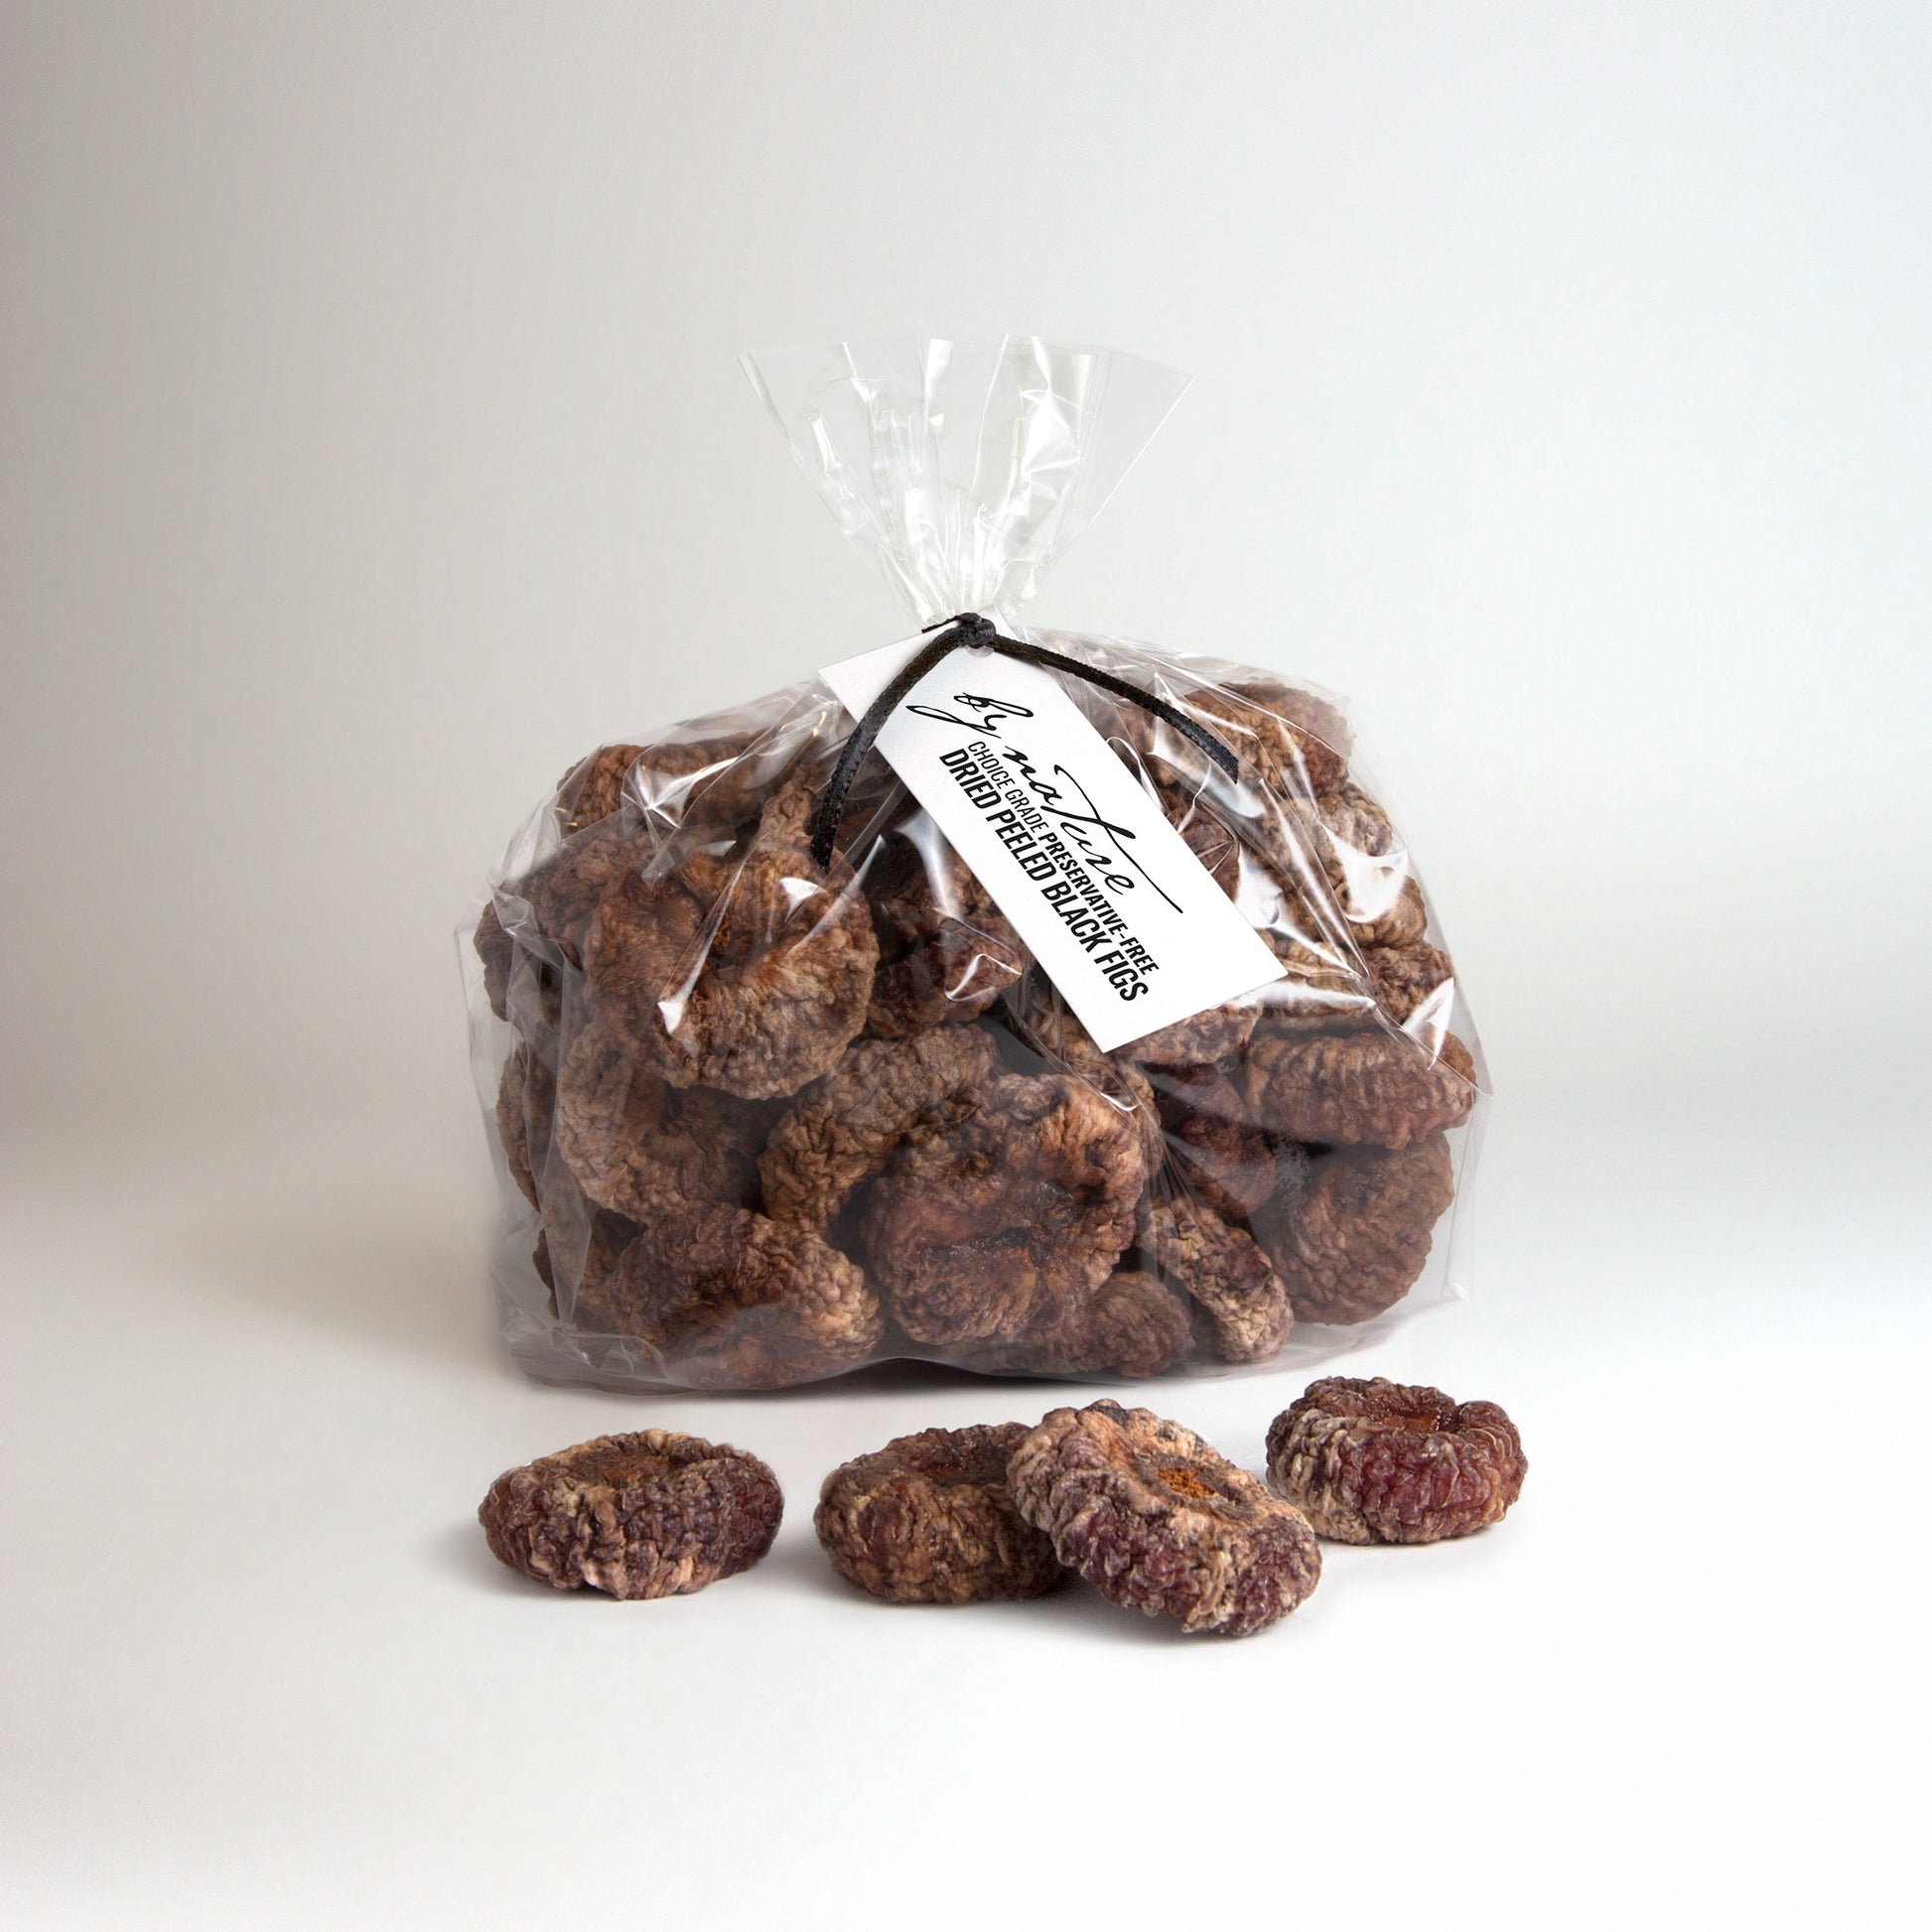 BY NATURE Dried Black Figs, 500g - peeled, preservative-free.